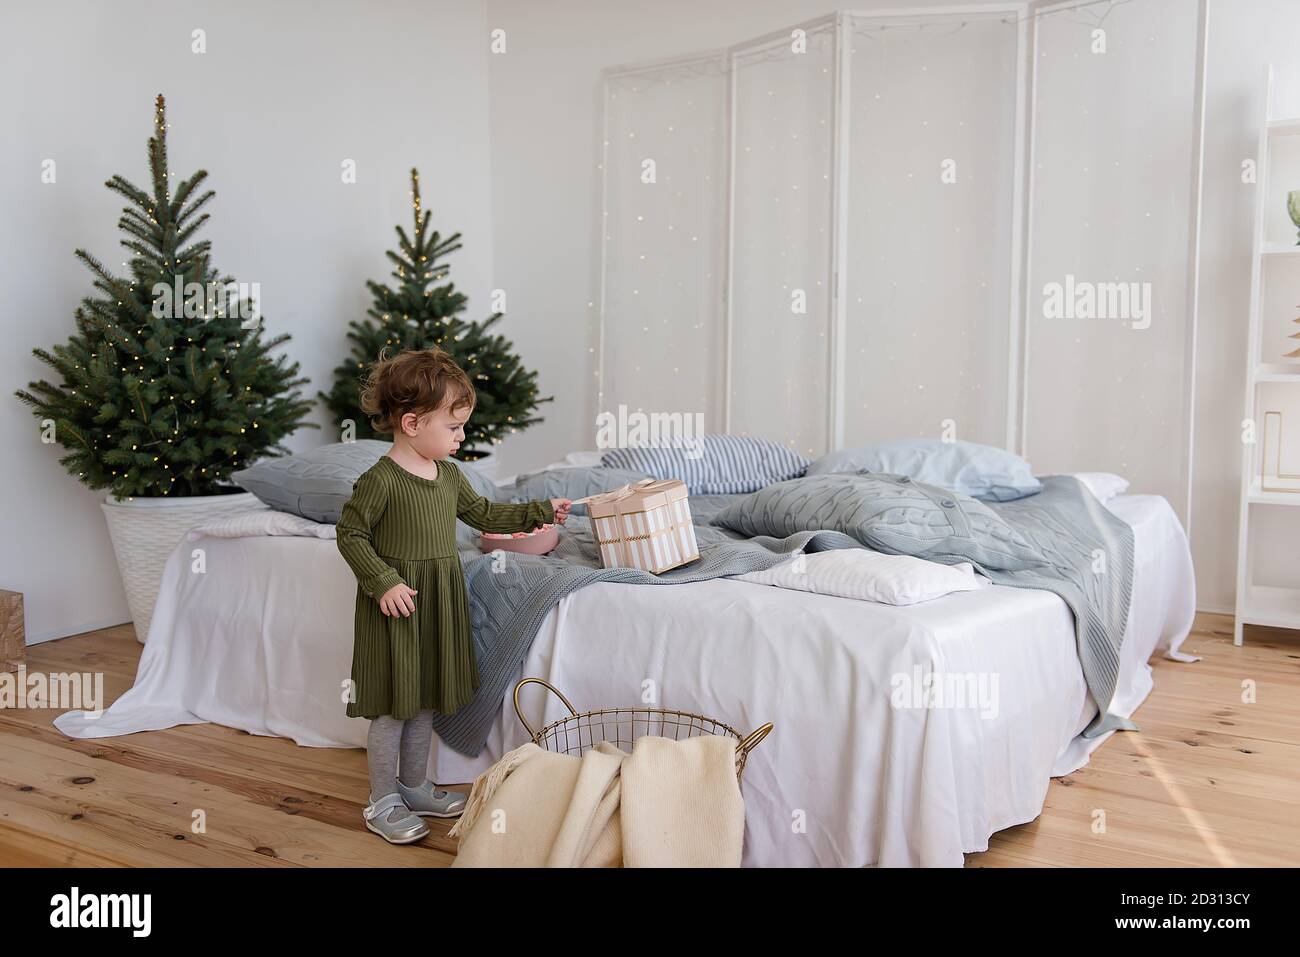 A little girl in a warm green dress found a present from Santa Claus on the sofa. Background in  blurred garland of lights, Christmas tree. White bed, Stock Photo